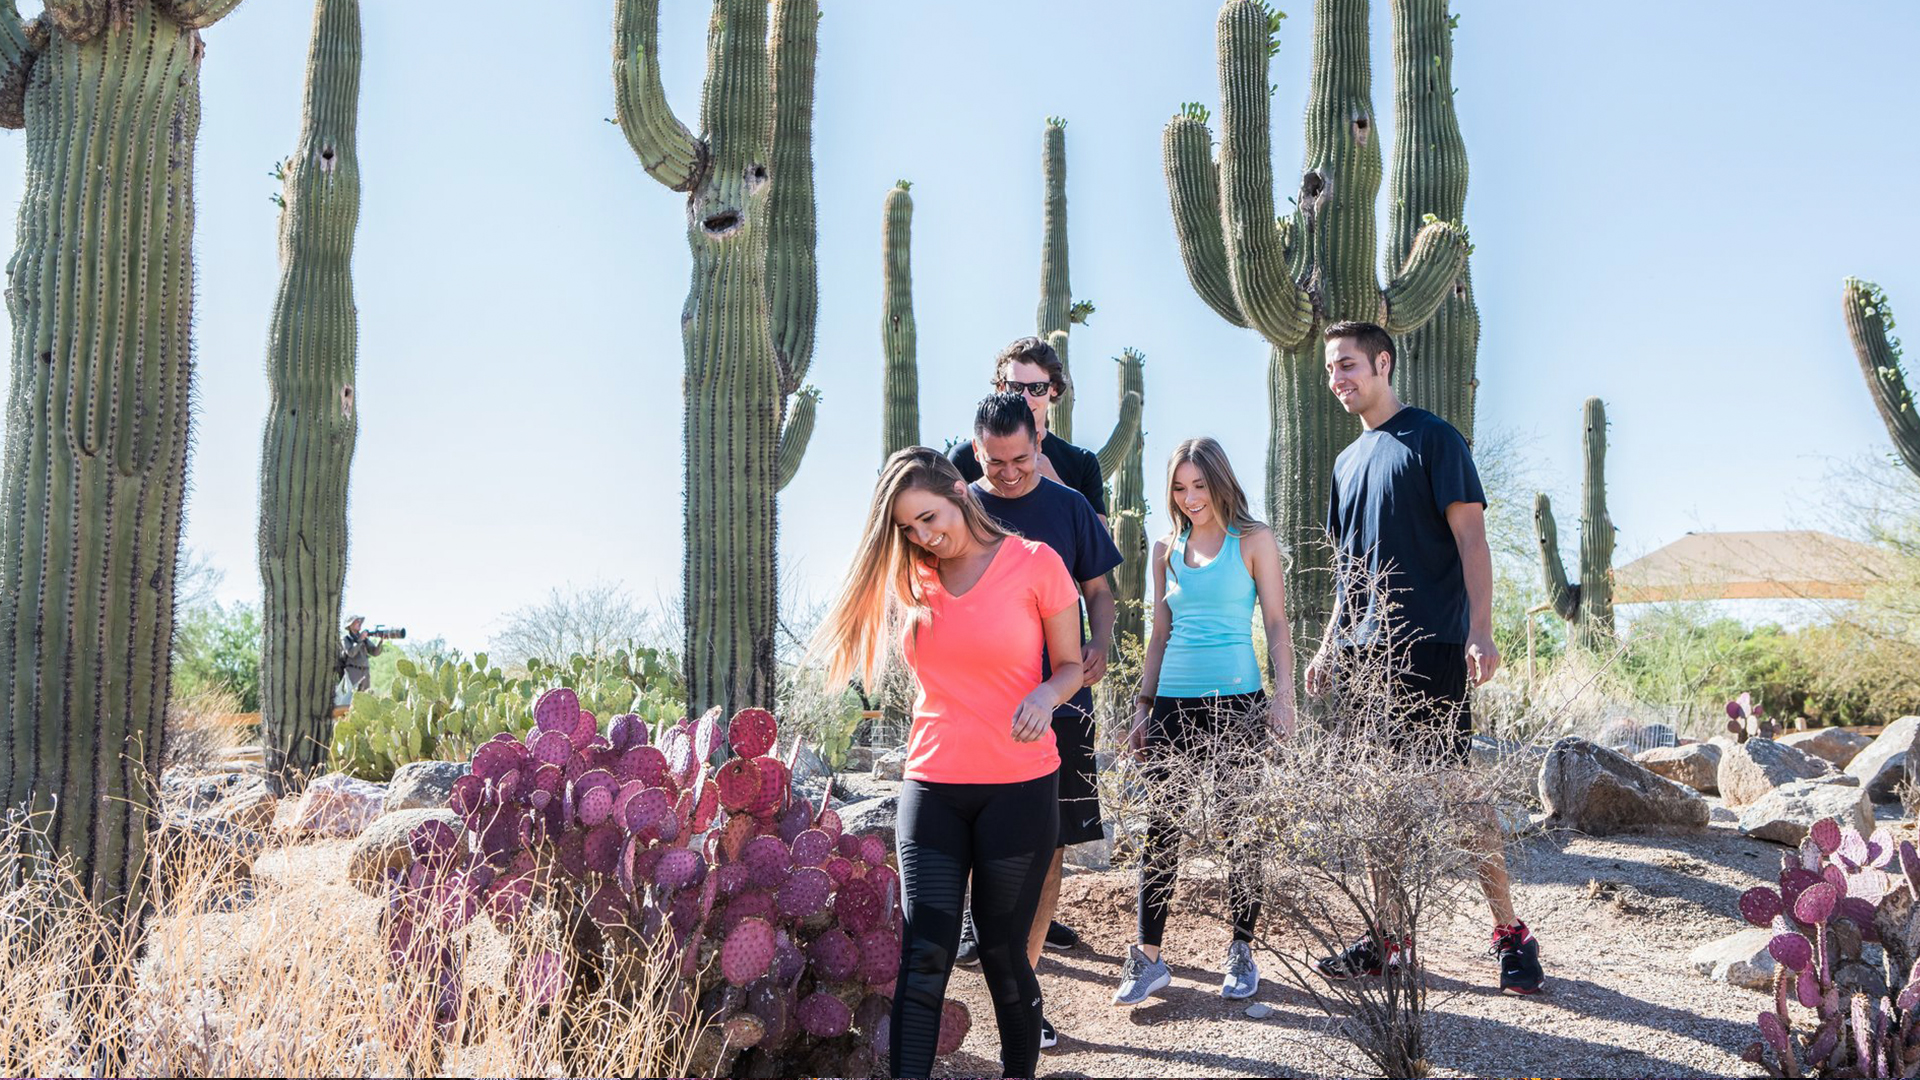 Hikers stay on the trail and leave no trace in Gilbert Arizona